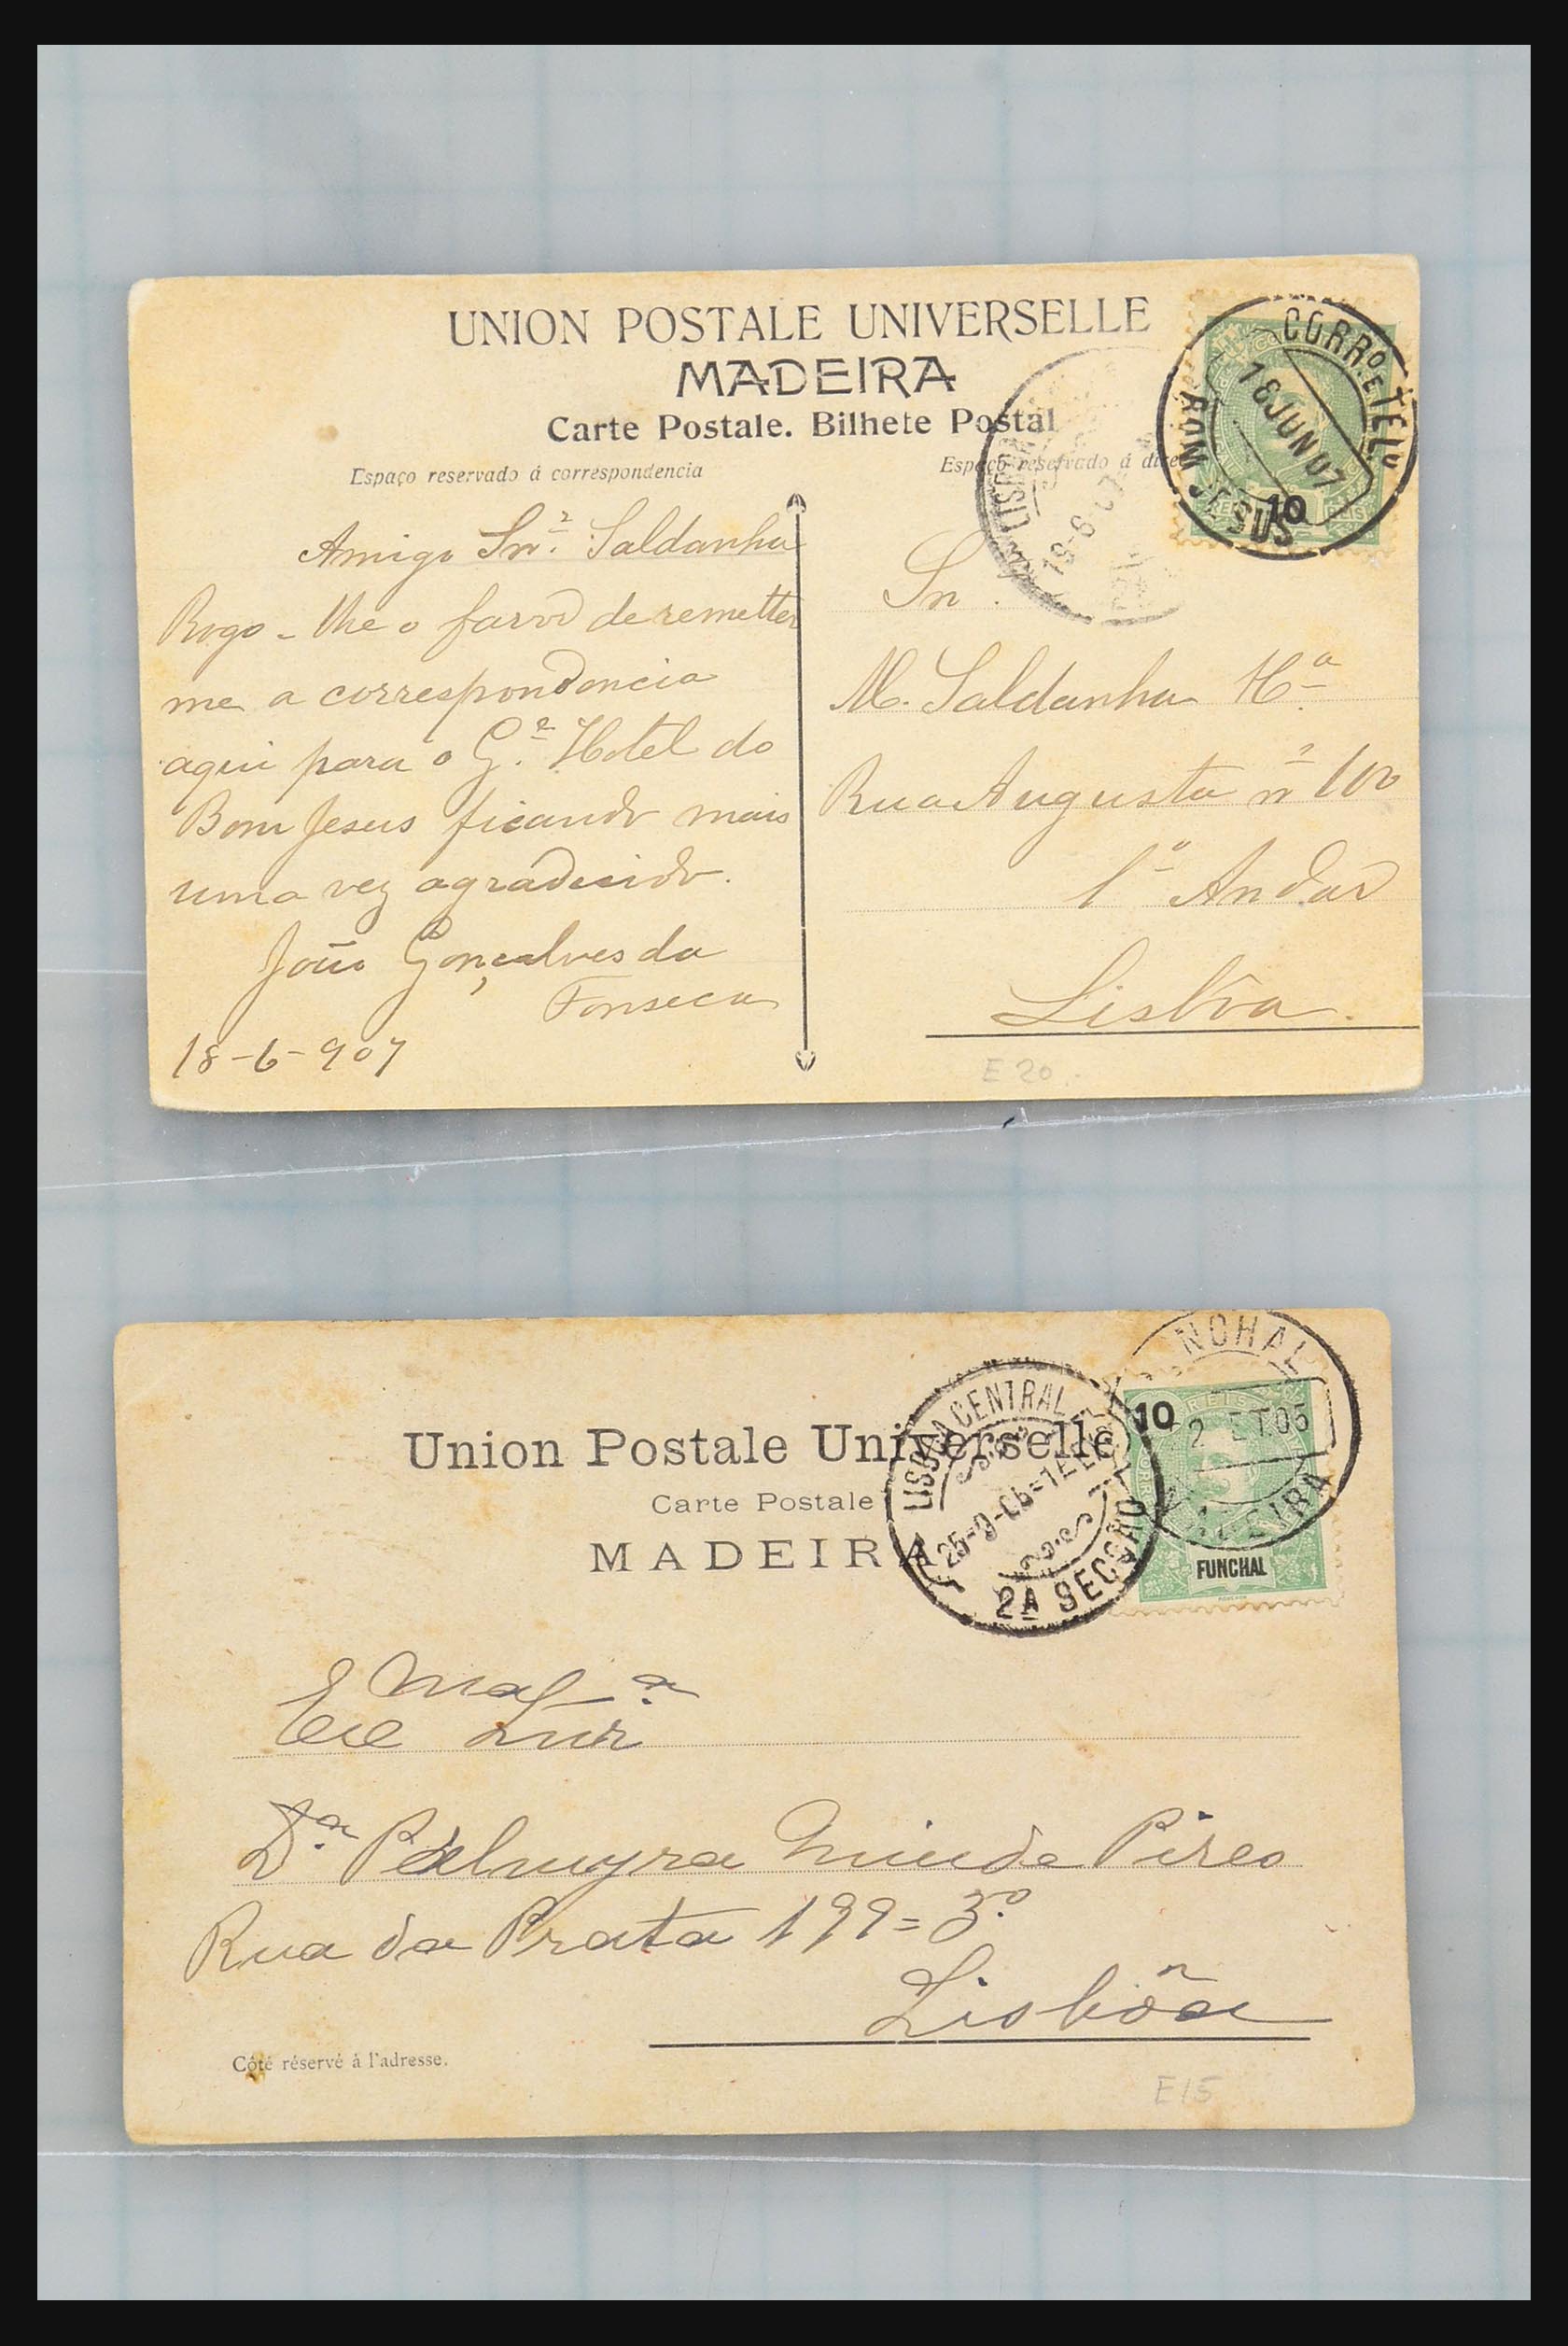 31358 243 - 31358 Portugal/Luxemburg/Greece covers 1880-1960.